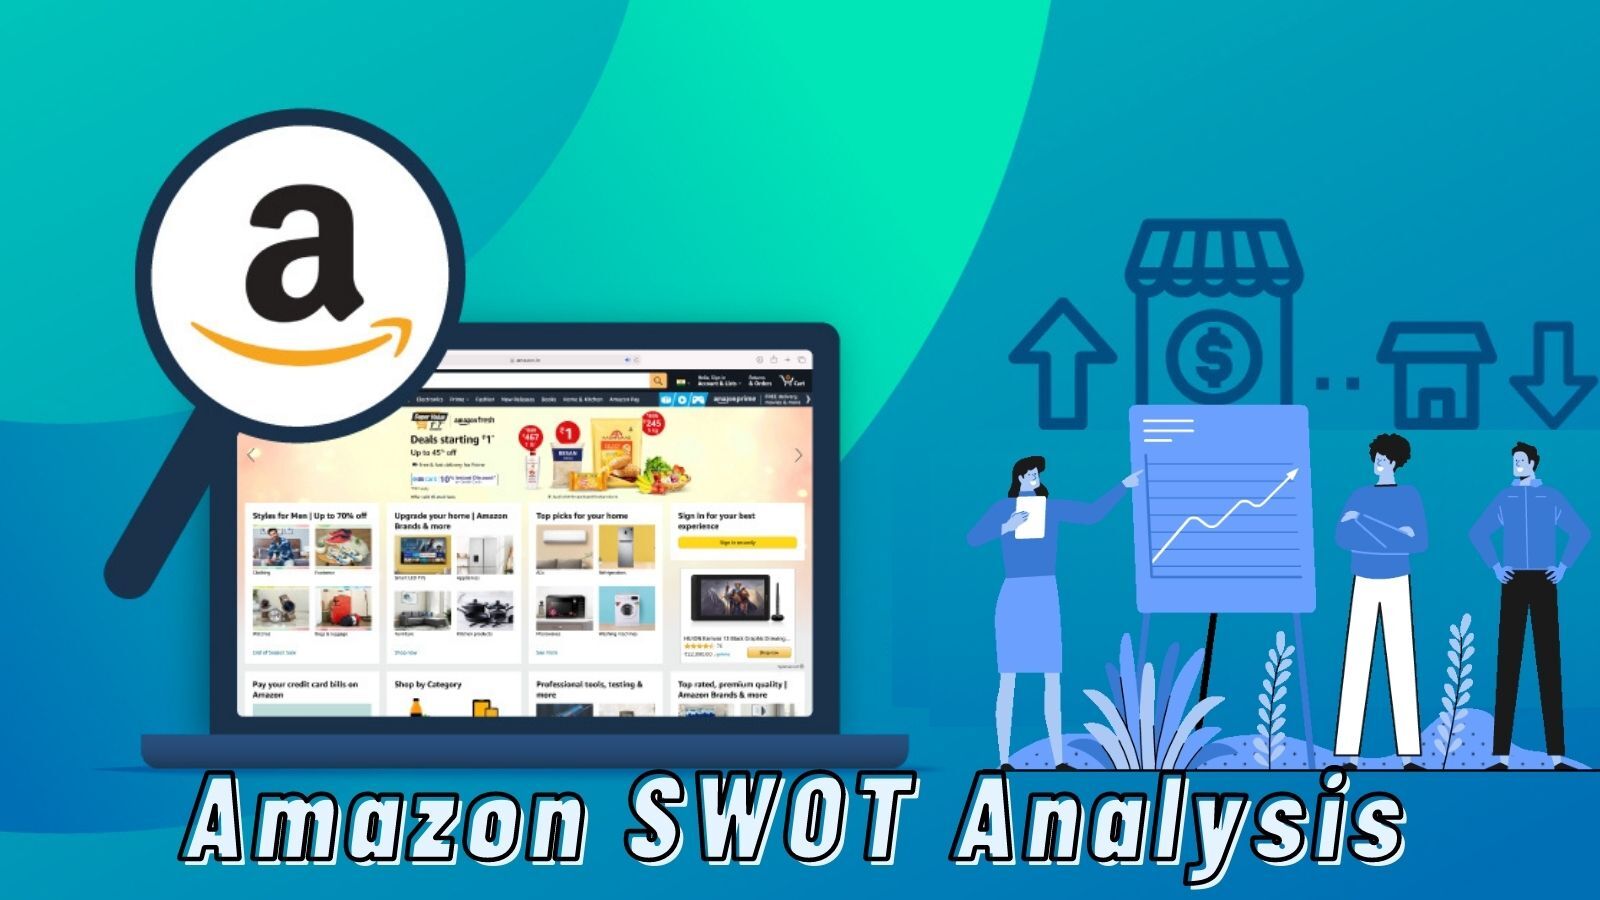 Amazon SWOT Analysis (Something You Might Be Interested In)